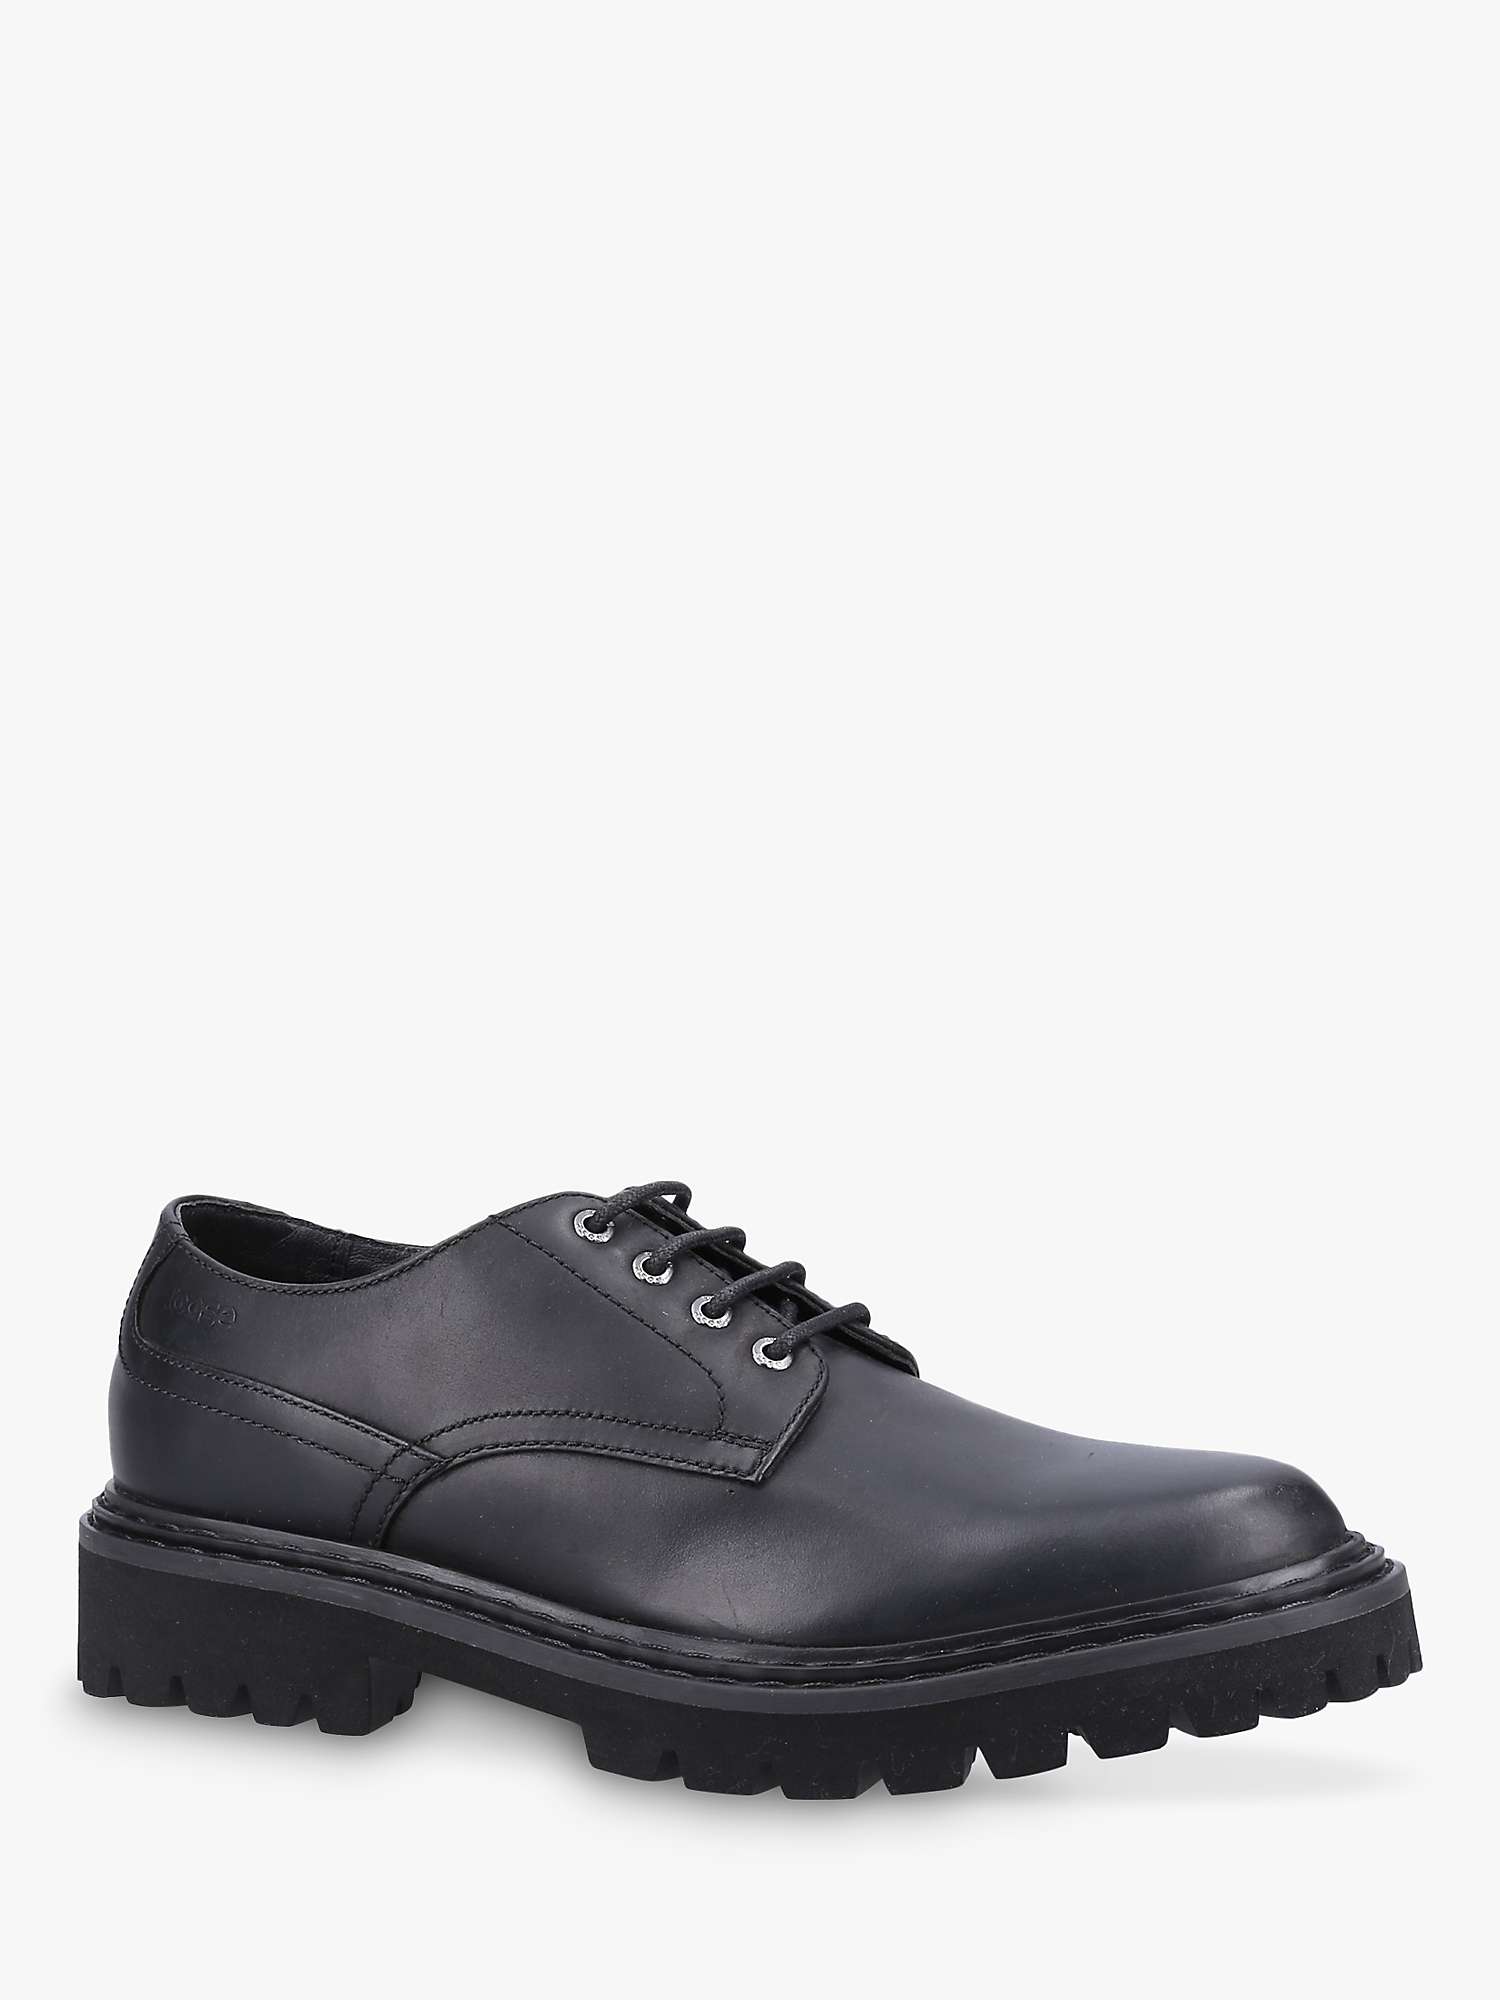 Base London Wick Leather Formal Shoes, Black at John Lewis & Partners